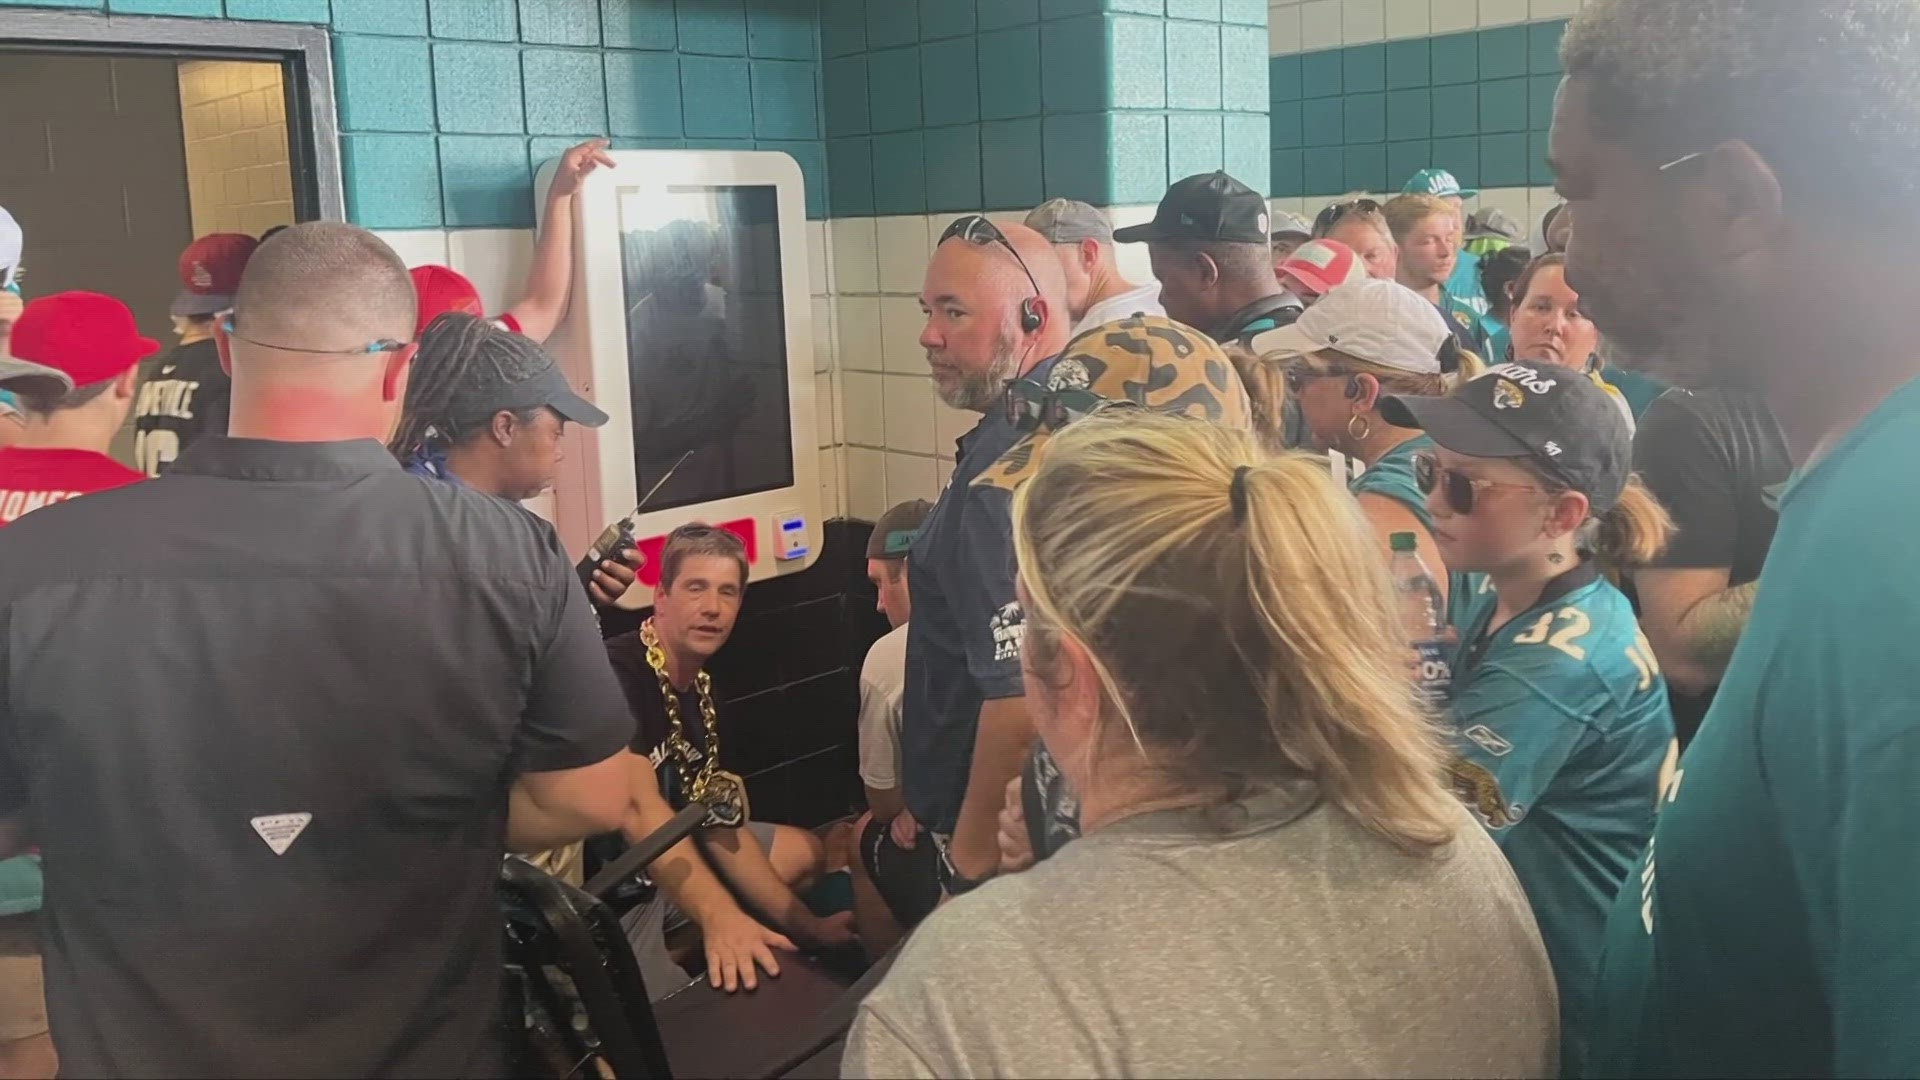 The Jacksonville Fire and Rescue Department said most of the people treated during the game were for heat-related issues. At kickoff, it was 88 degrees.